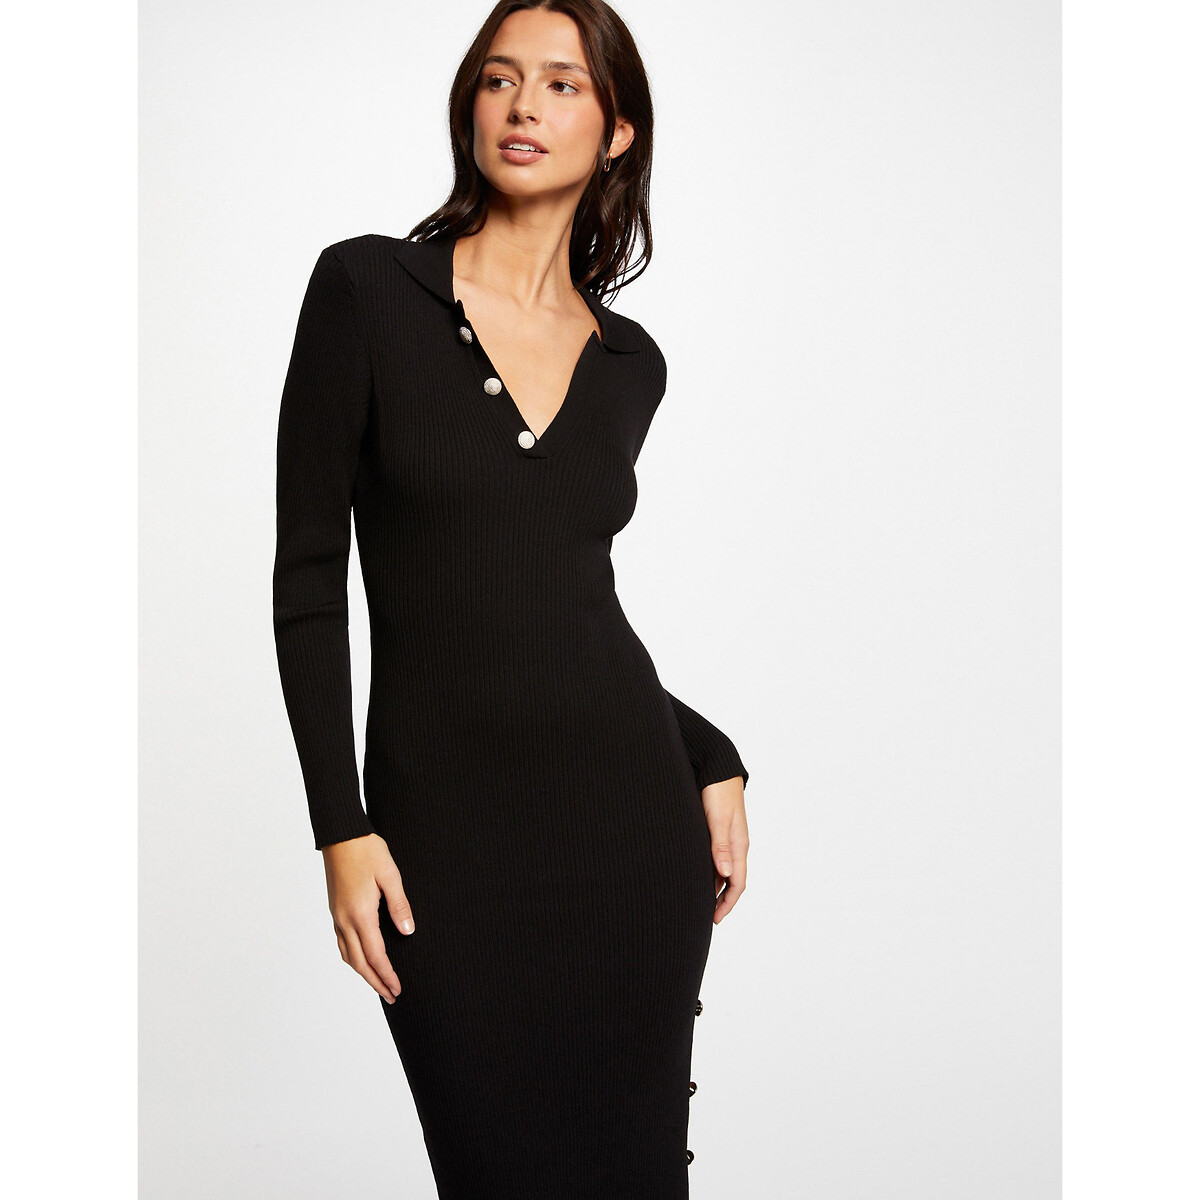 Image of Bodycon Jumper Dress with Split, Button Trim and Long Sleeves